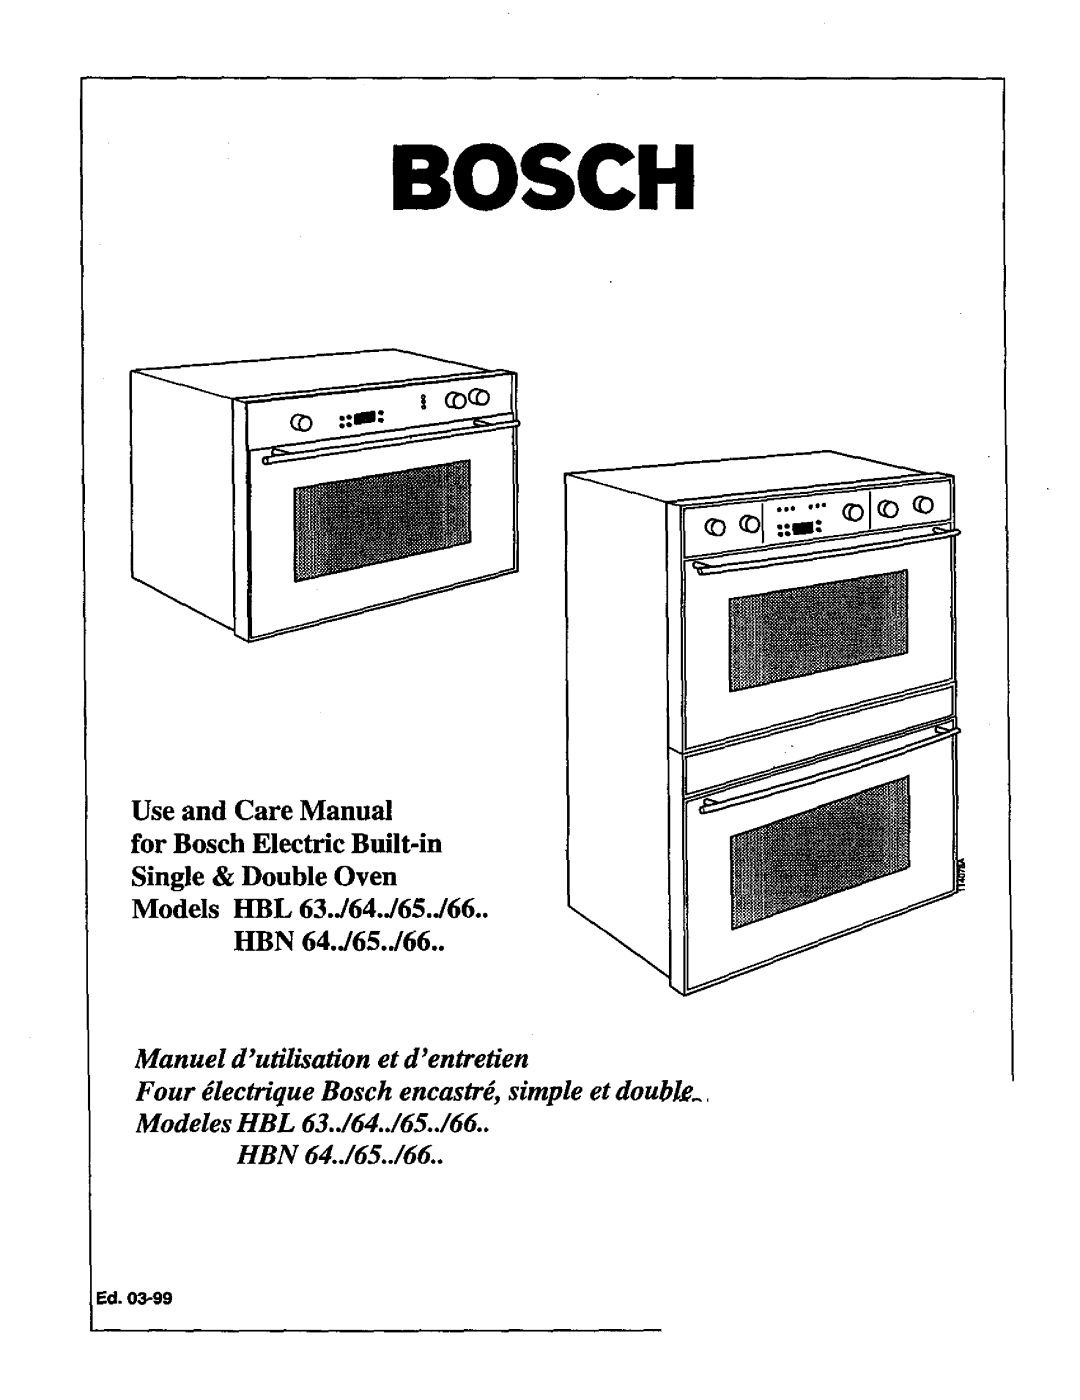 Bosch Appliances HBL 63, HBL 64 manuel dutilisation Use and Care Manual for Bosch Electric Built-in, HBN 64../65../66 